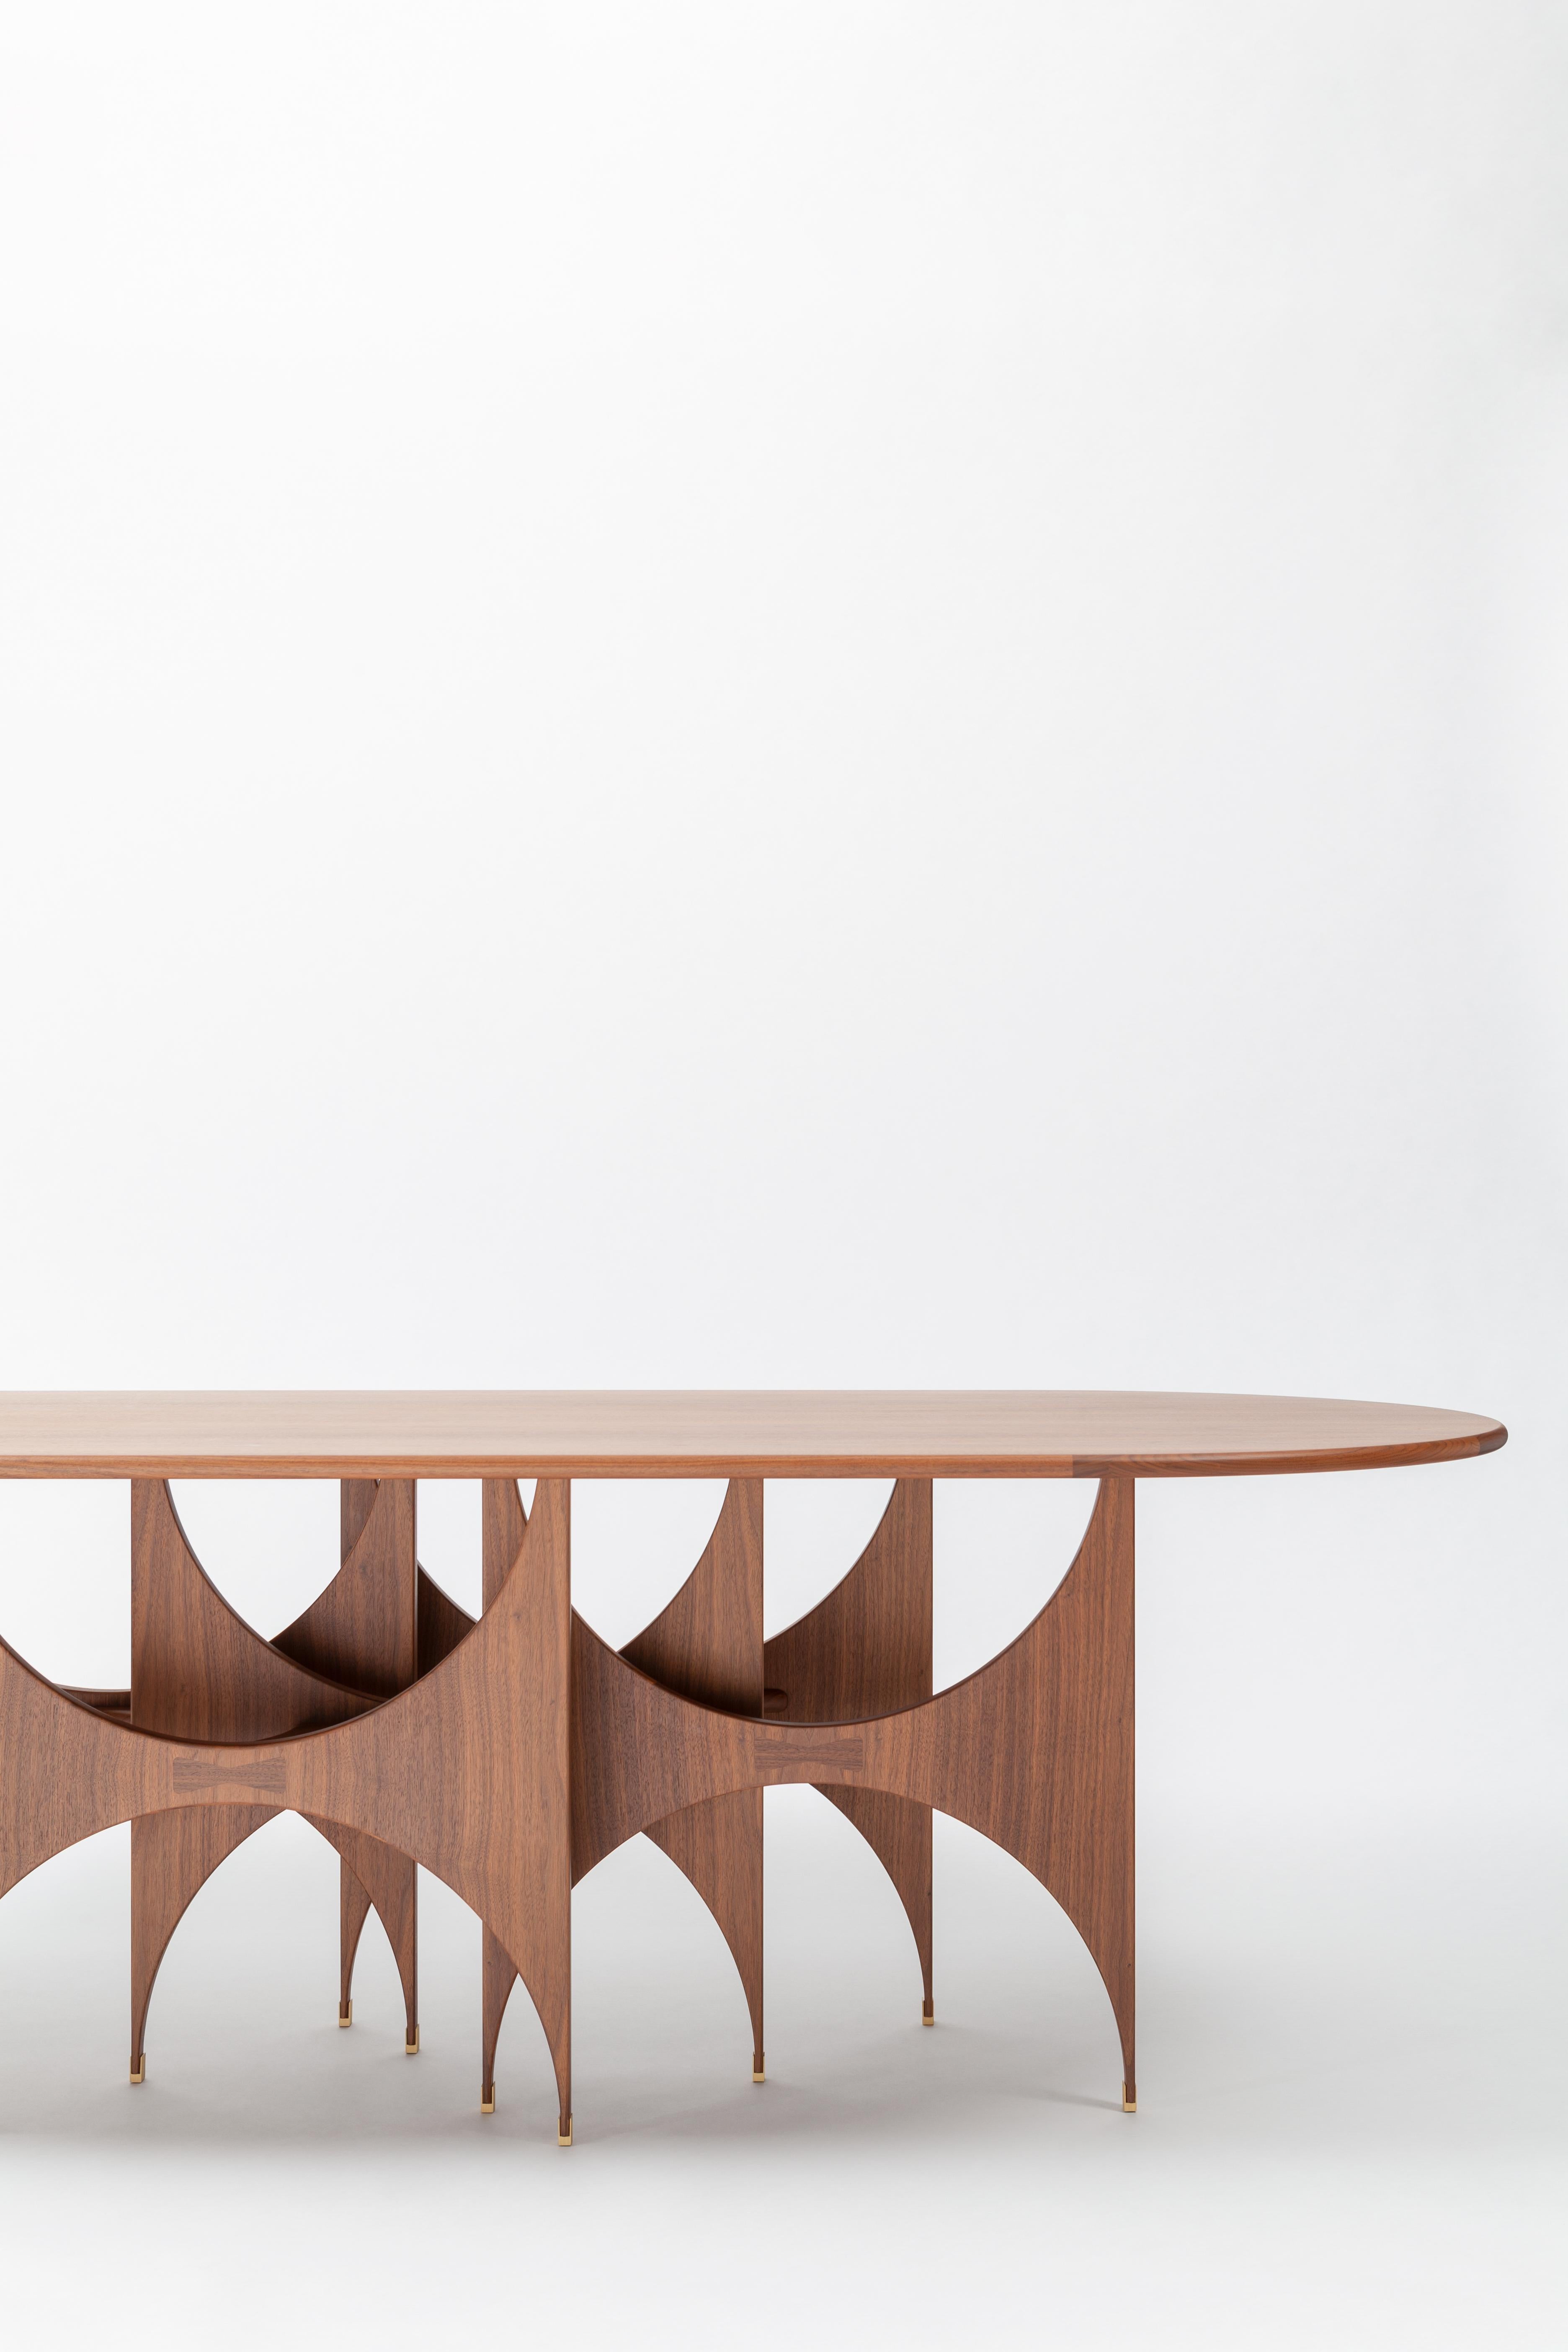 The 'Butterfly in the dining table version made of solid wood is a project that Hannes Peer together with Claudio Spotti of SEM have been pursuing for a long time. The final decision came in view of the Salone 2021. The aim was to create a piece of